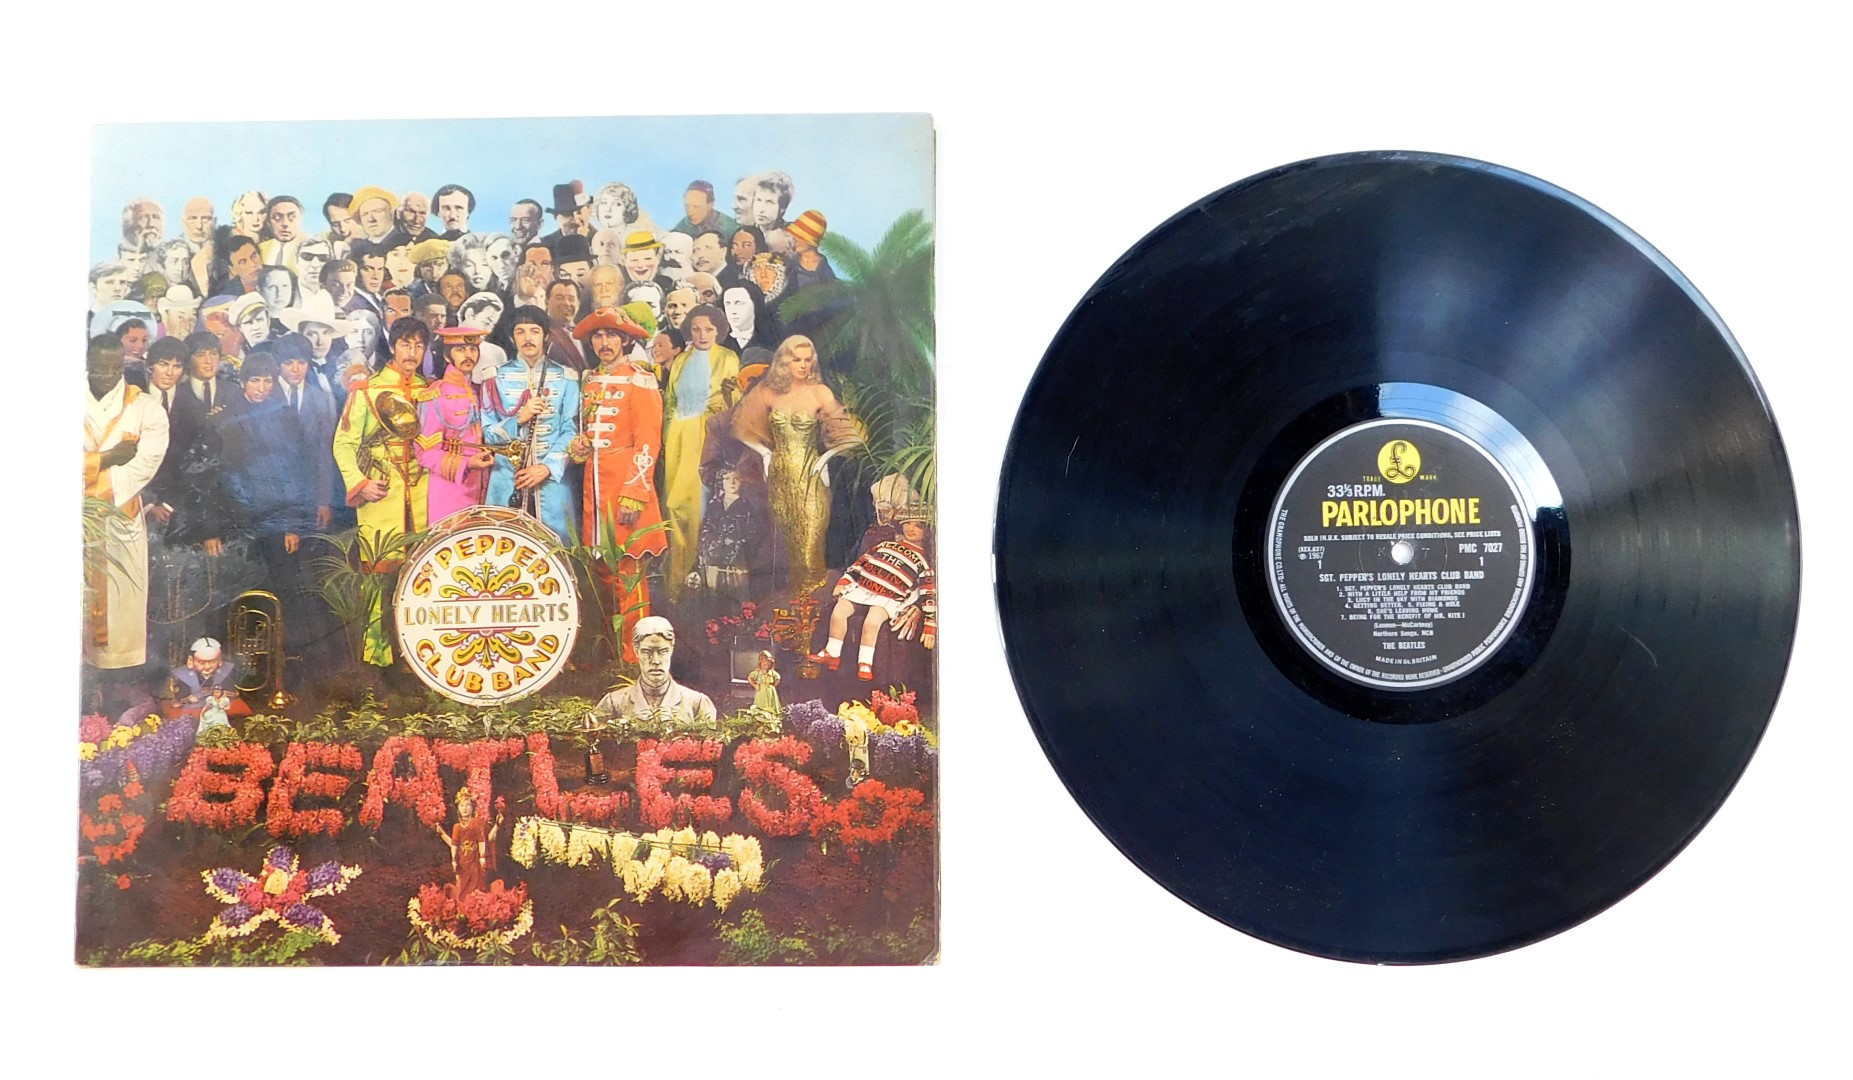 A Beatles Sgt Pepper's Lonely Hearts Club Band vinyl LP album, PMC7027, with card insert, 1967.